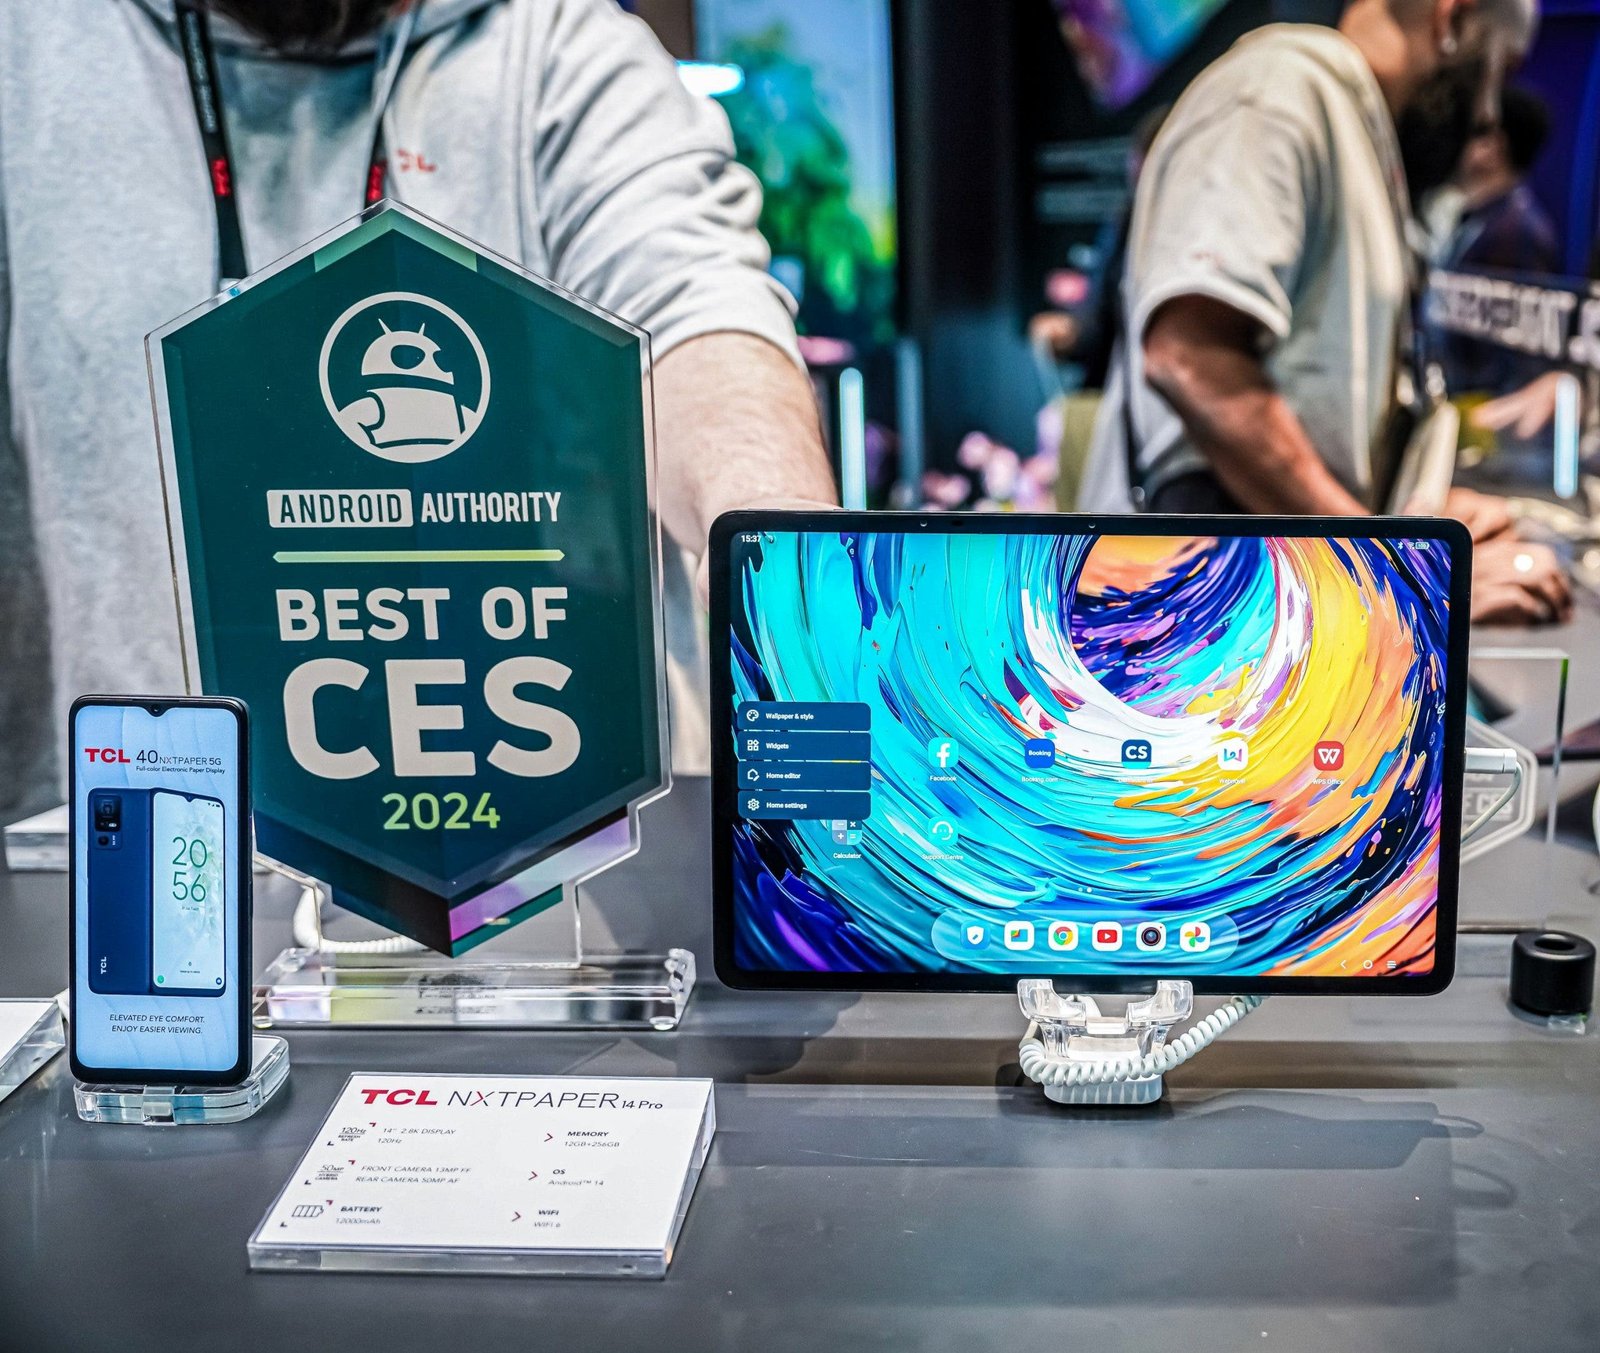 TCL Honored with Over 40 Awards and Accolades for 115 inch TV and Other Innovative Products Across Categories at CES 2024